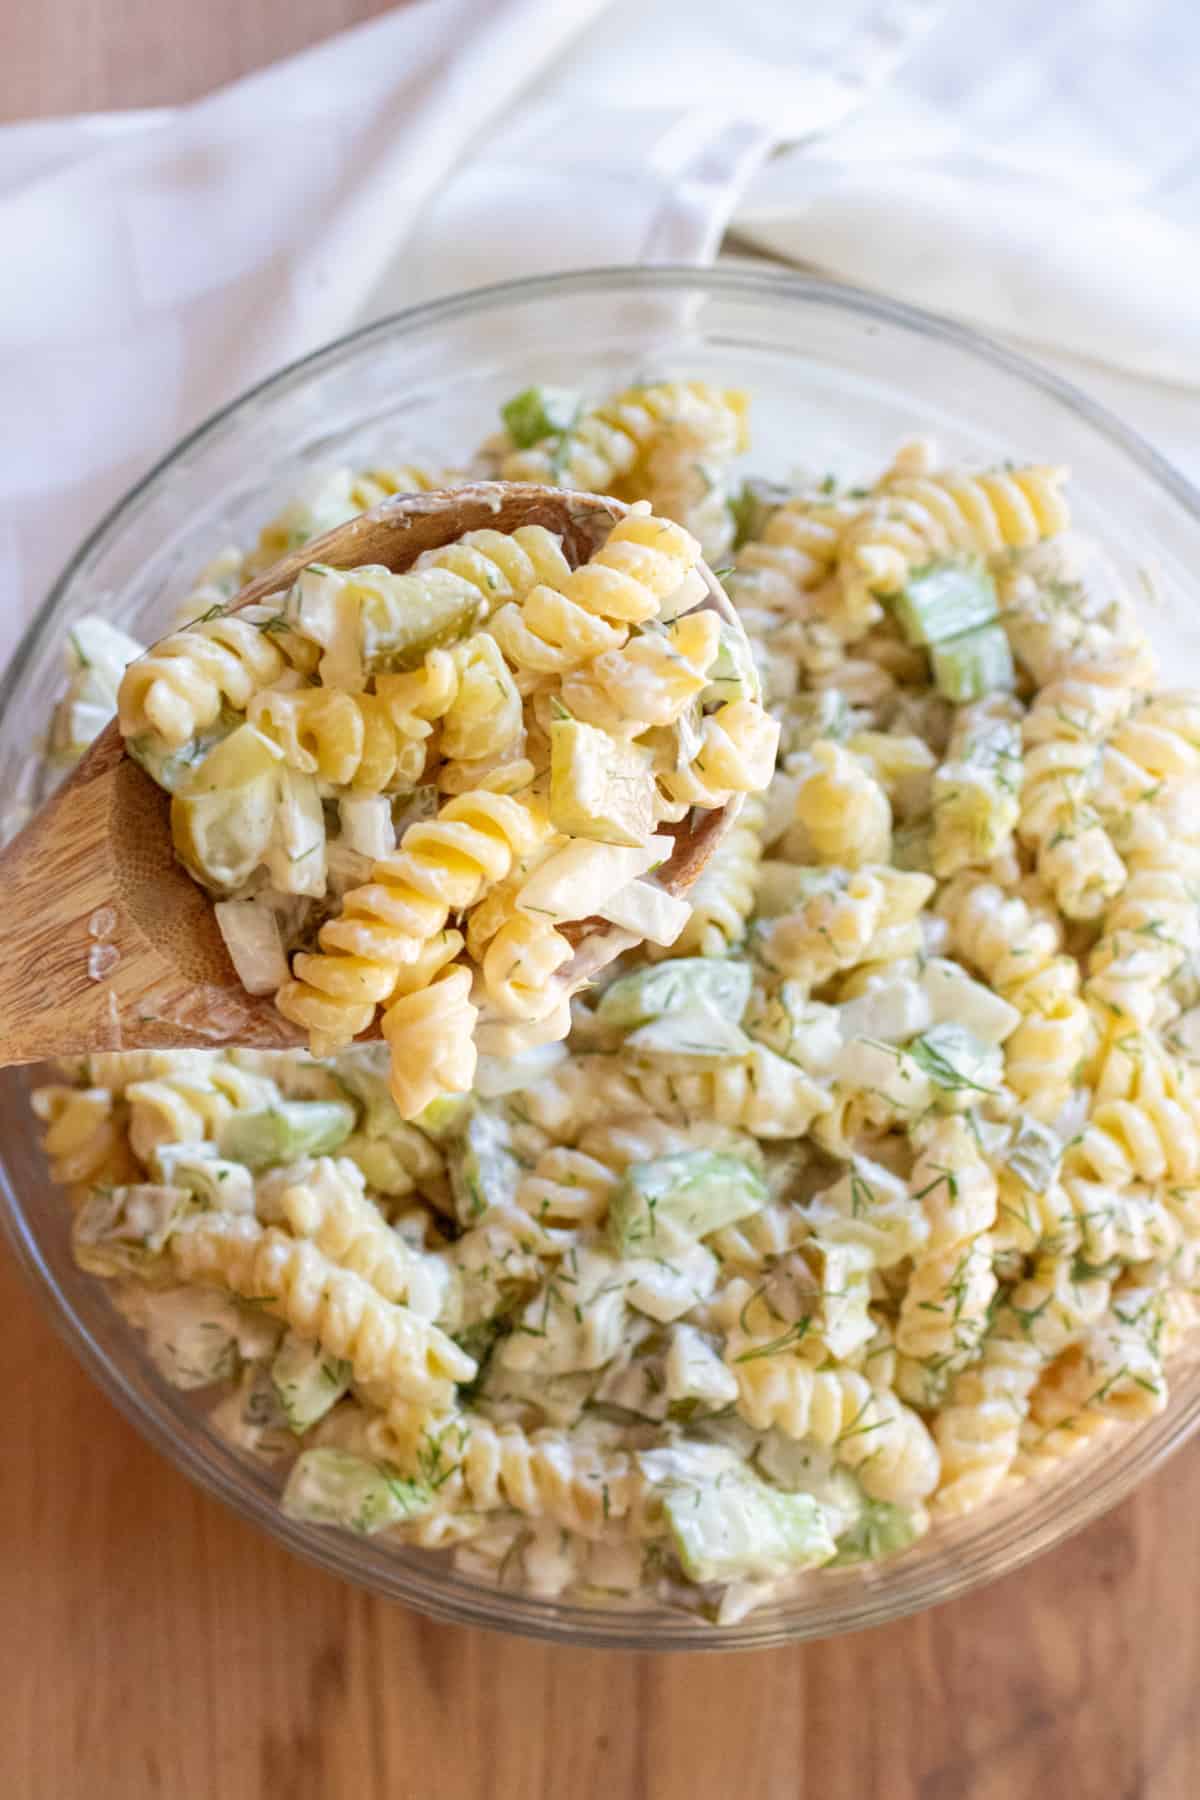 an overhead bowl of rotini pasta salad with celery and dill pickle and a wooden spoon.